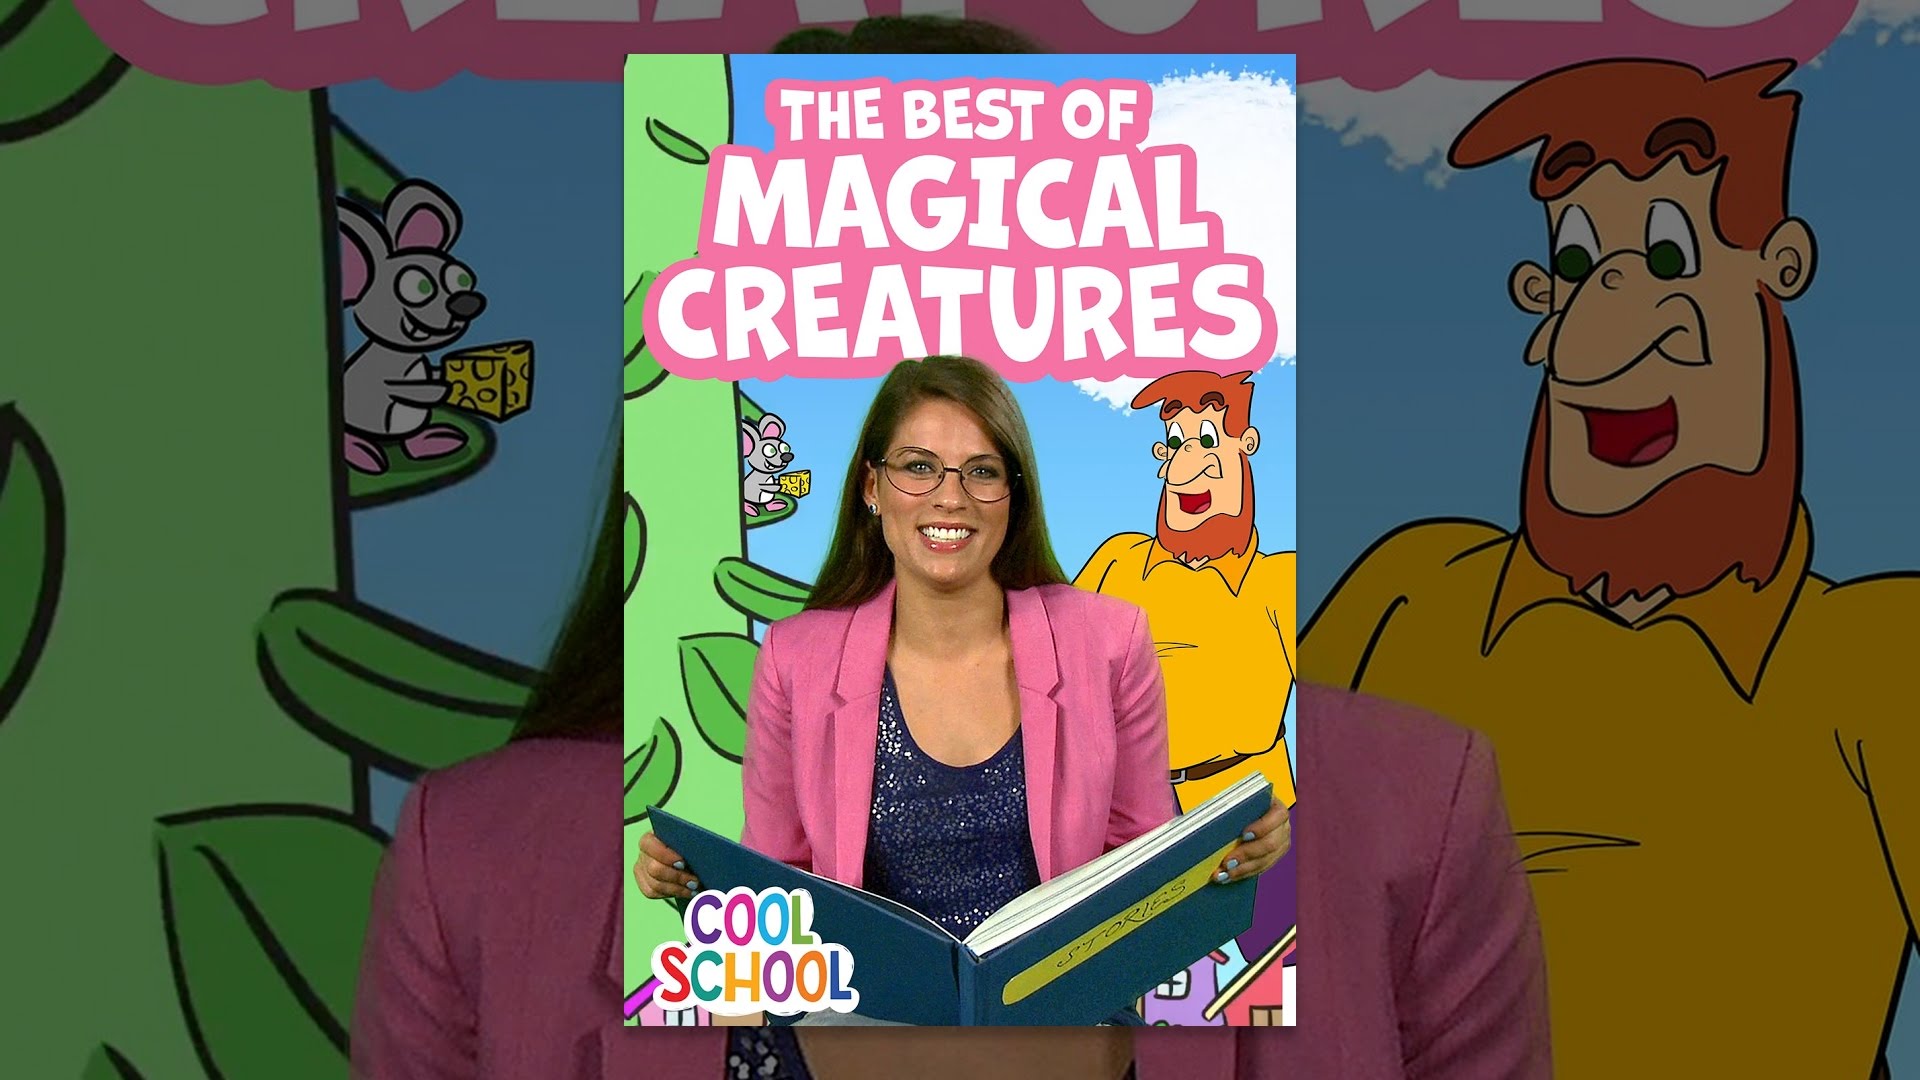 The Best of Magical Creatures - Cool School